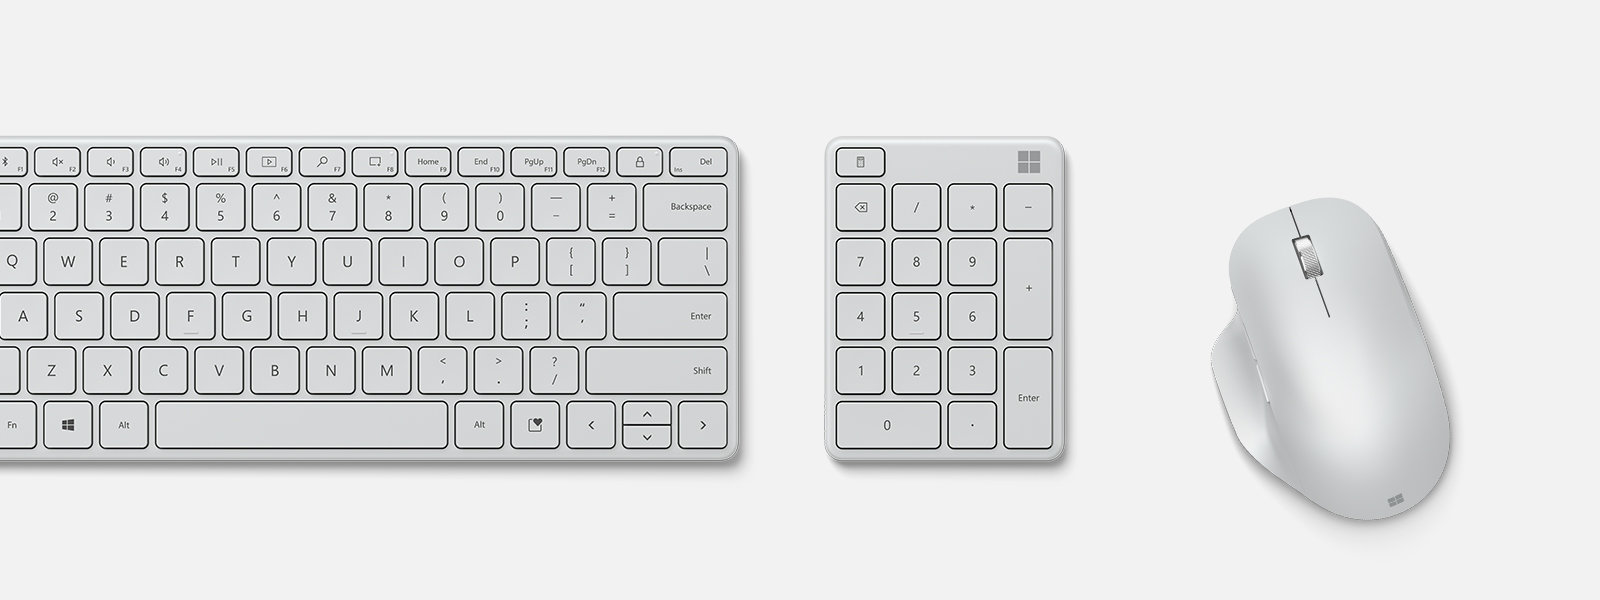 Microsoft Number Pad next to matching Bluetooth keyboard and mouse.